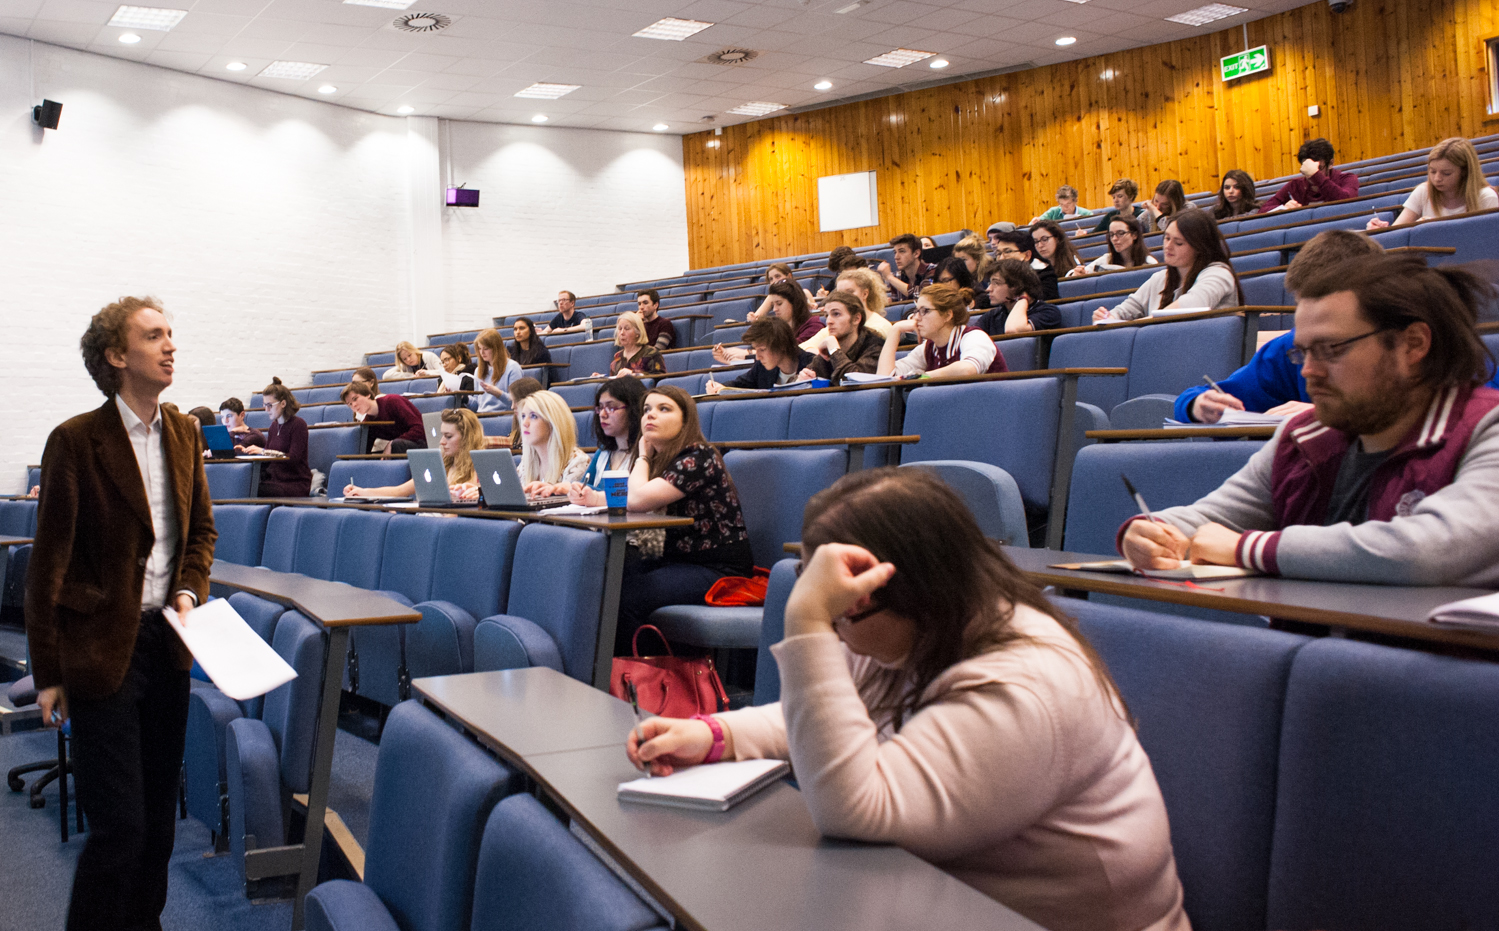 Students seated in a lecture hall.